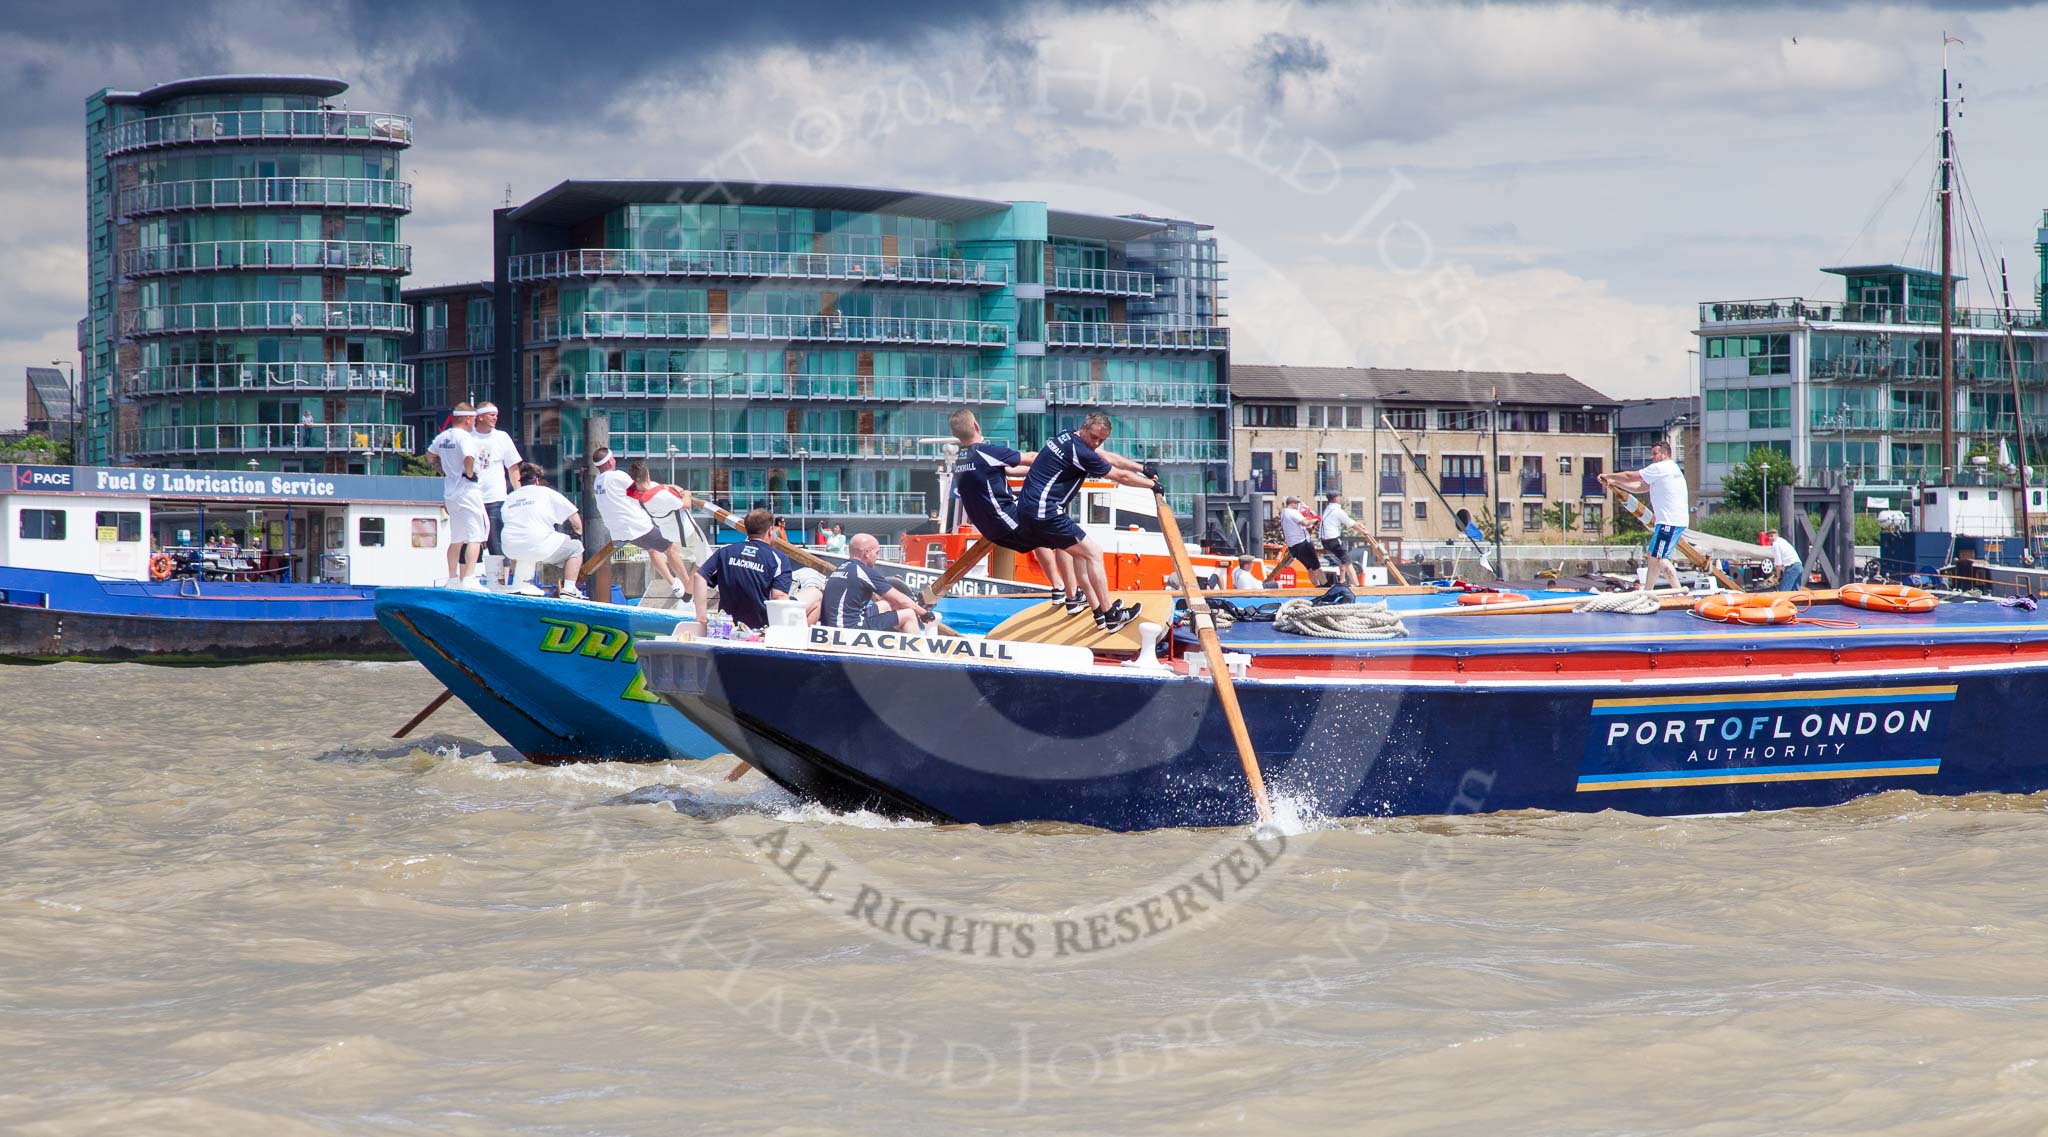 TOW River Thames Barge Driving Race 2014.
River Thames between Greenwich and Westminster,
London,

United Kingdom,
on 28 June 2014 at 13:29, image #244